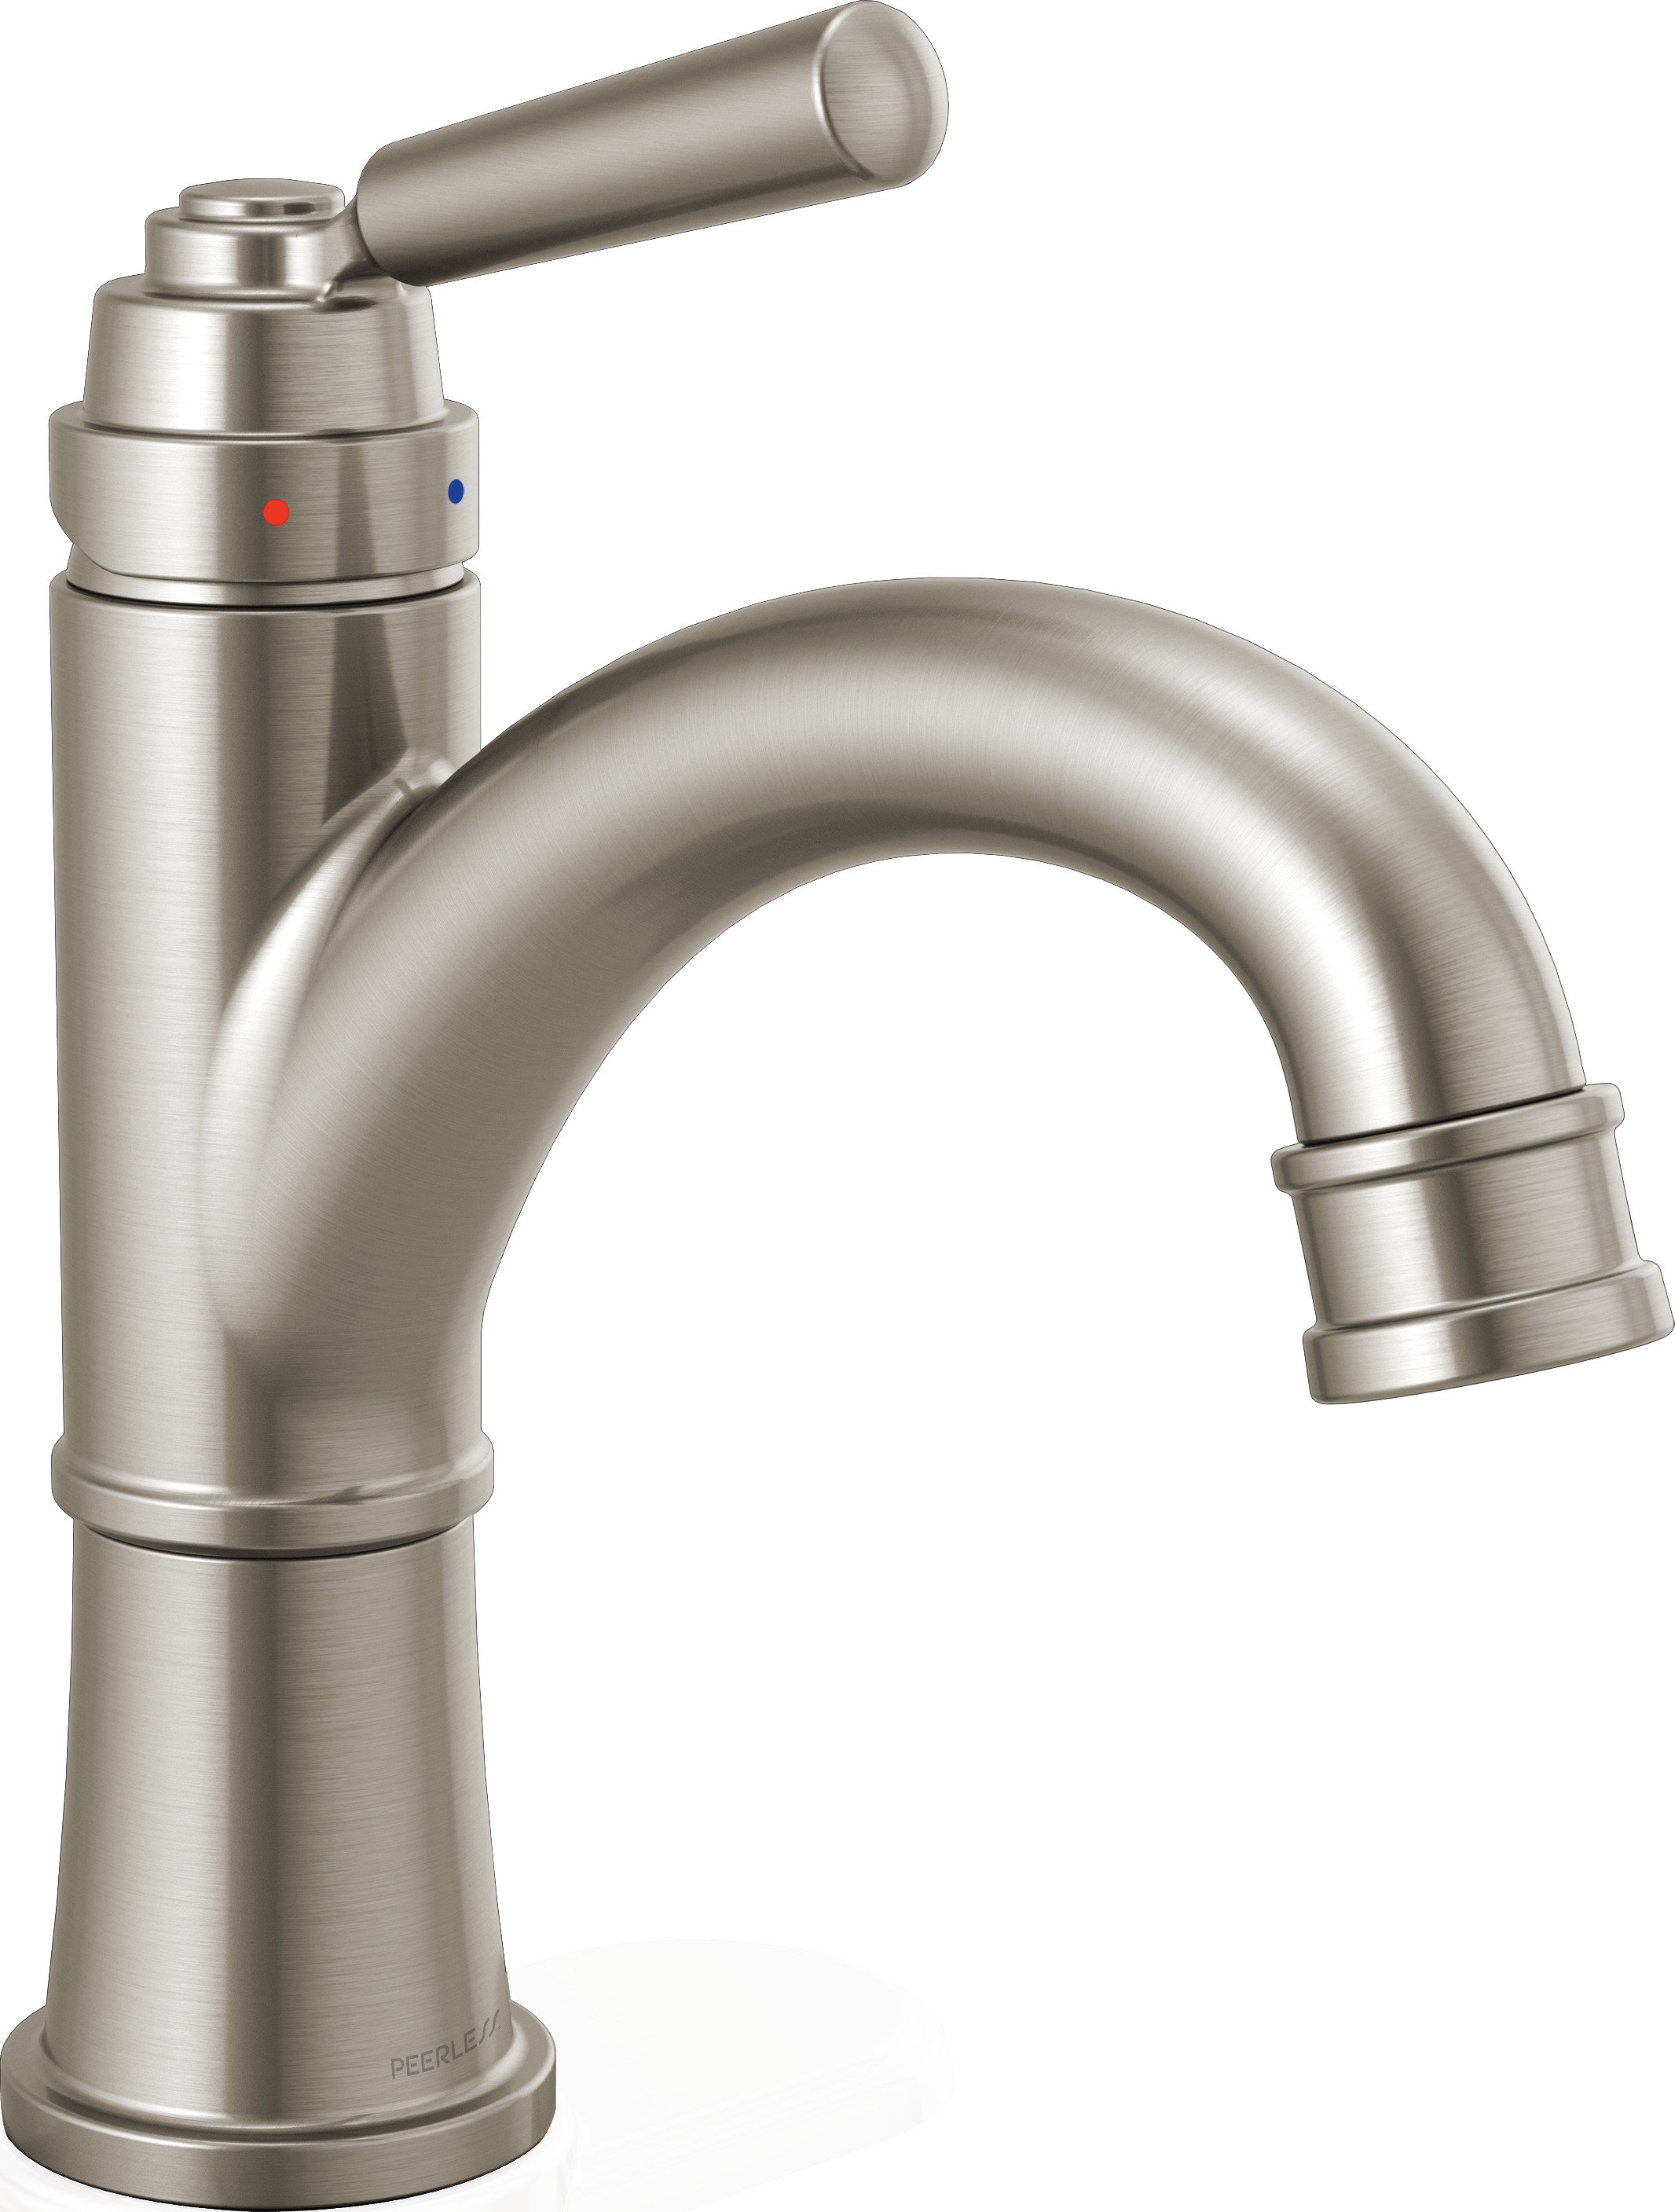 Peerless Faucets Westchester Single Hole Bathroom Faucet With